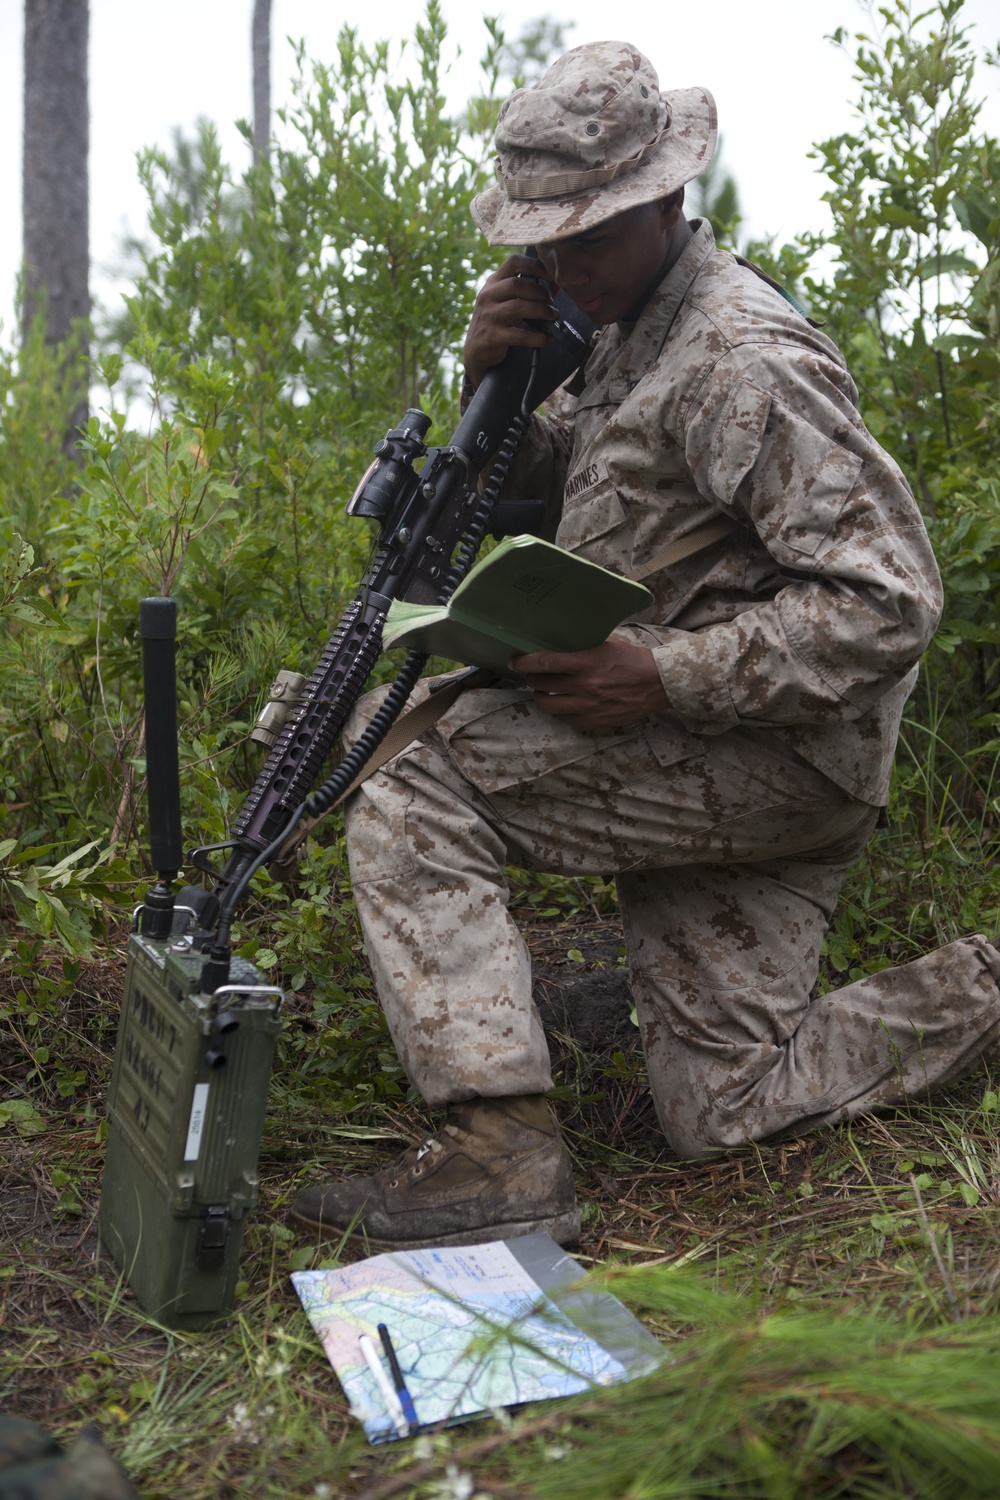 2nd Marine Division Annual Rifle Squad Competition